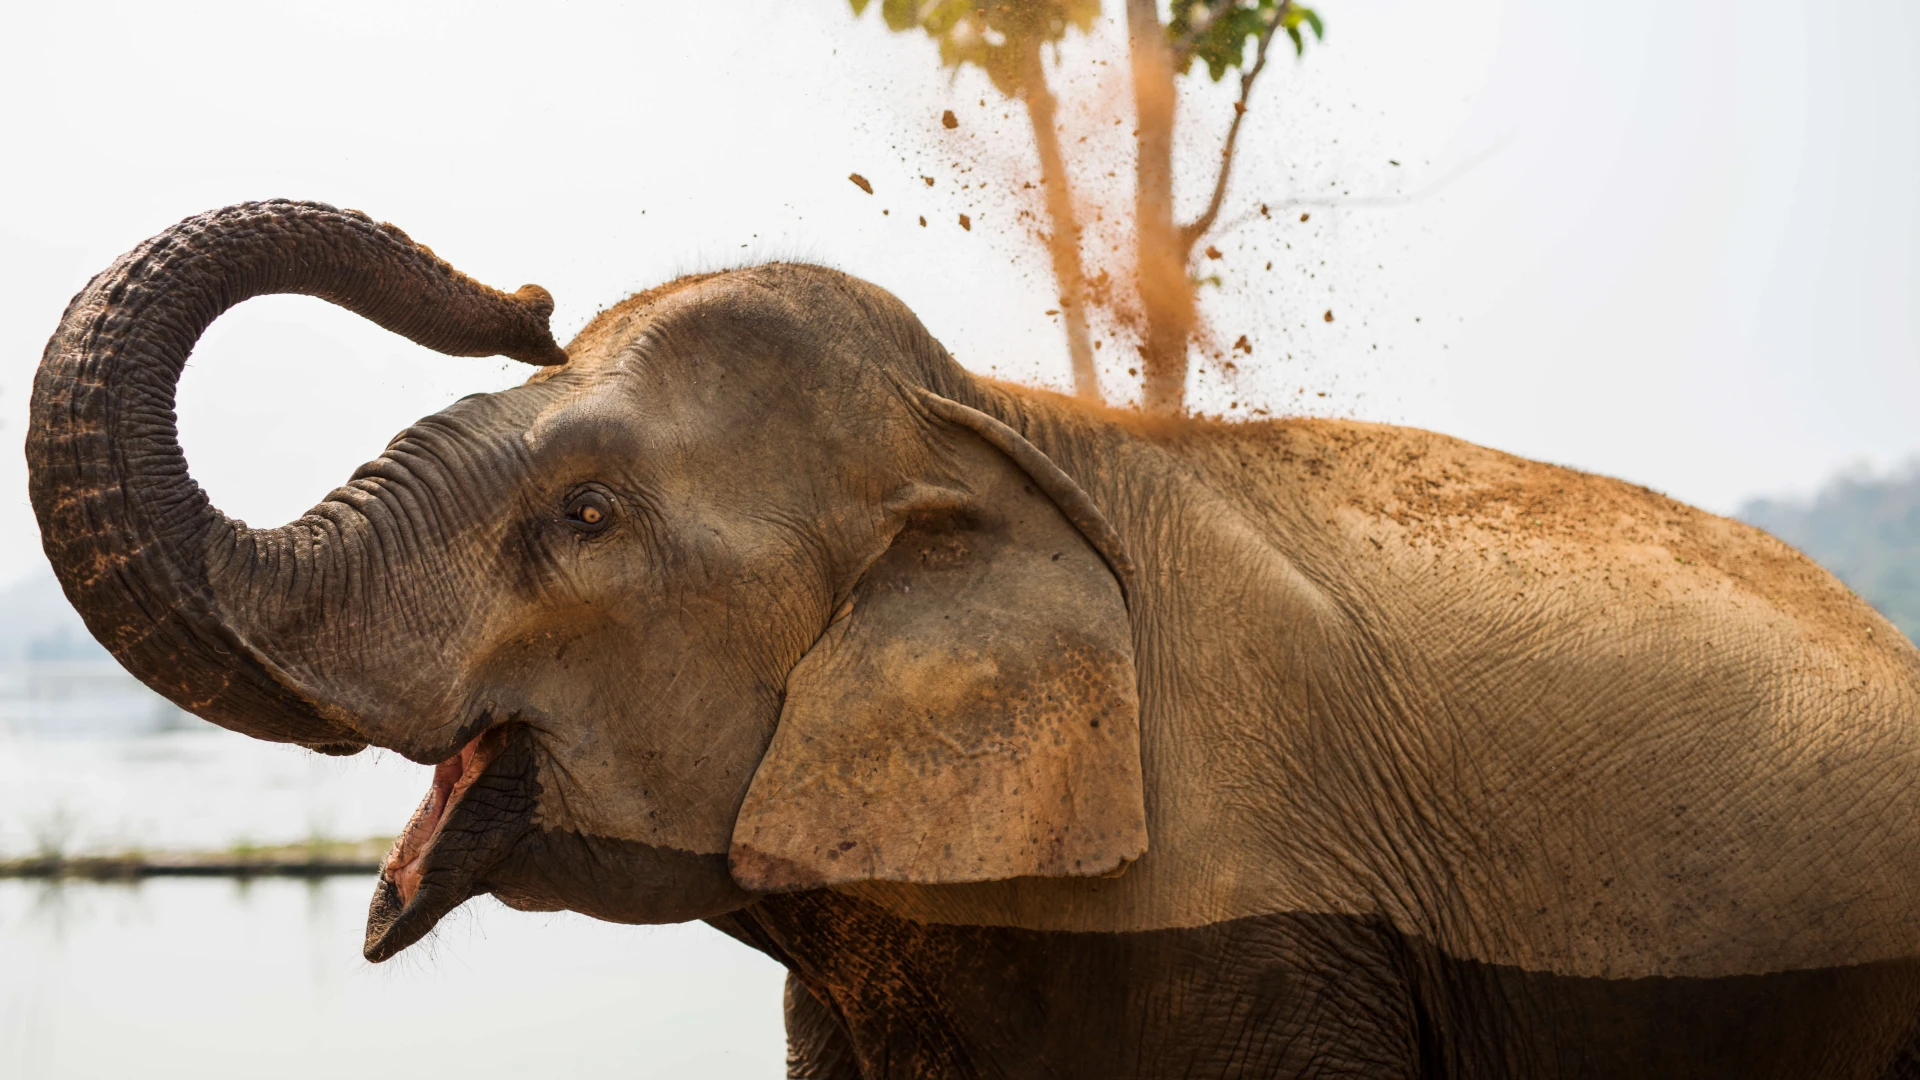 Froot Loops  Global Sanctuary for Elephants Shop